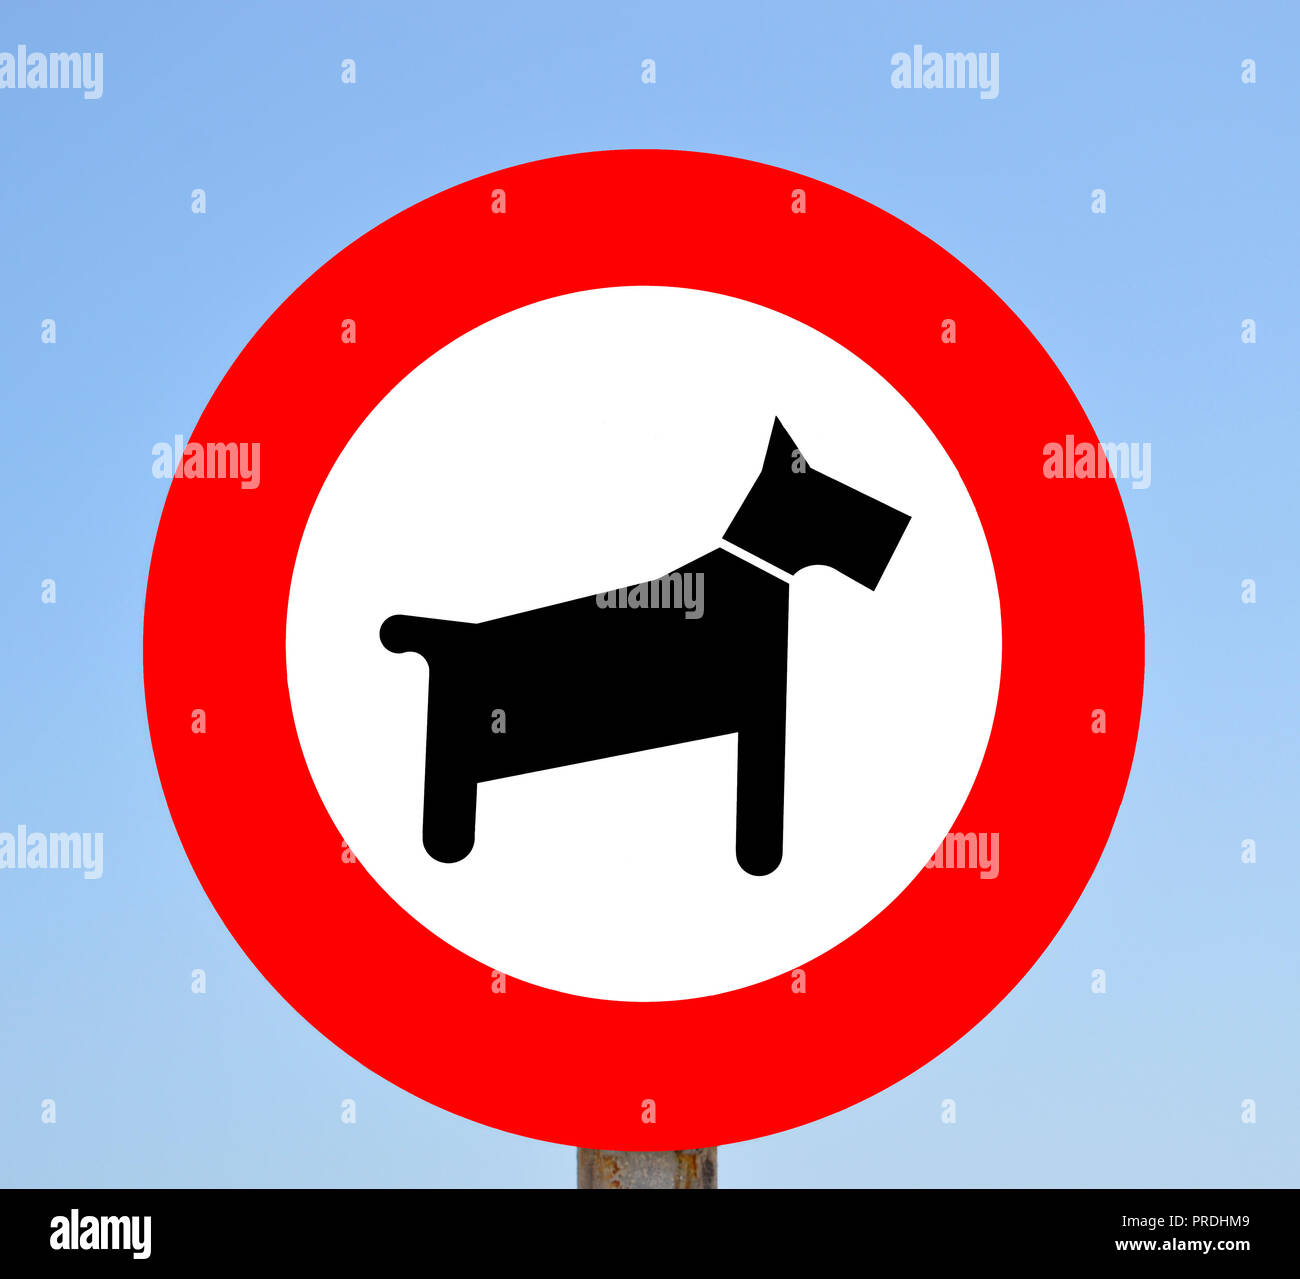 No dog walking allowed in this area order sign Stock Photo